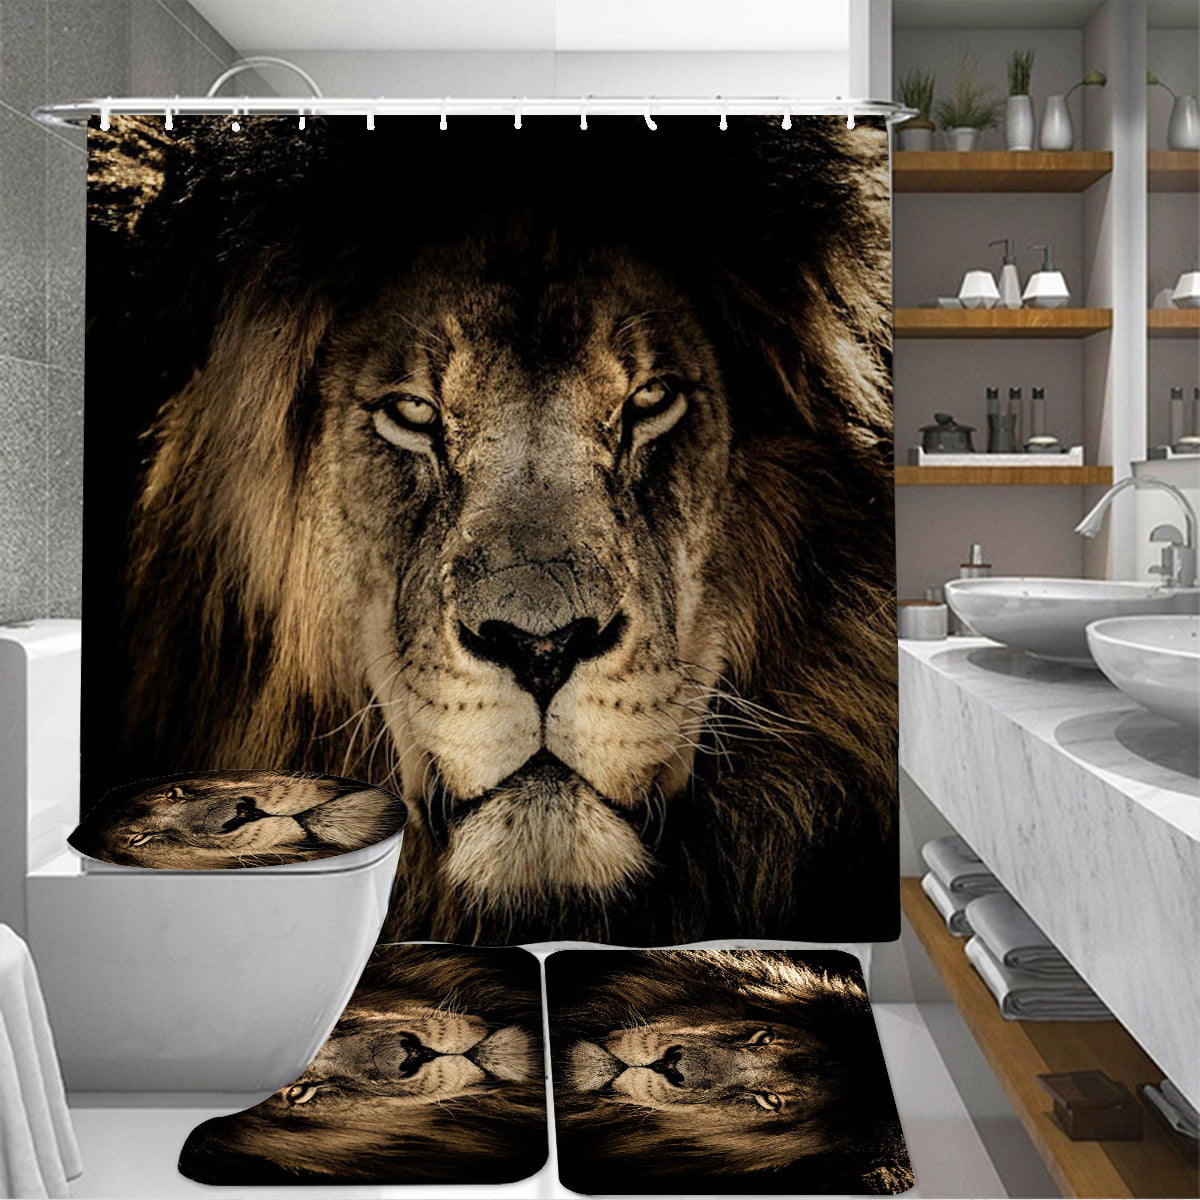 Pknoclan 4 Pcs Lion Shower Curtain Set with Non-Slip Rug Toilet Lid Cover and Bath Mat Black Lion King Shower Curtain Sets for Men Boy Lion King Beast Shower Curtain with 12 Hooks